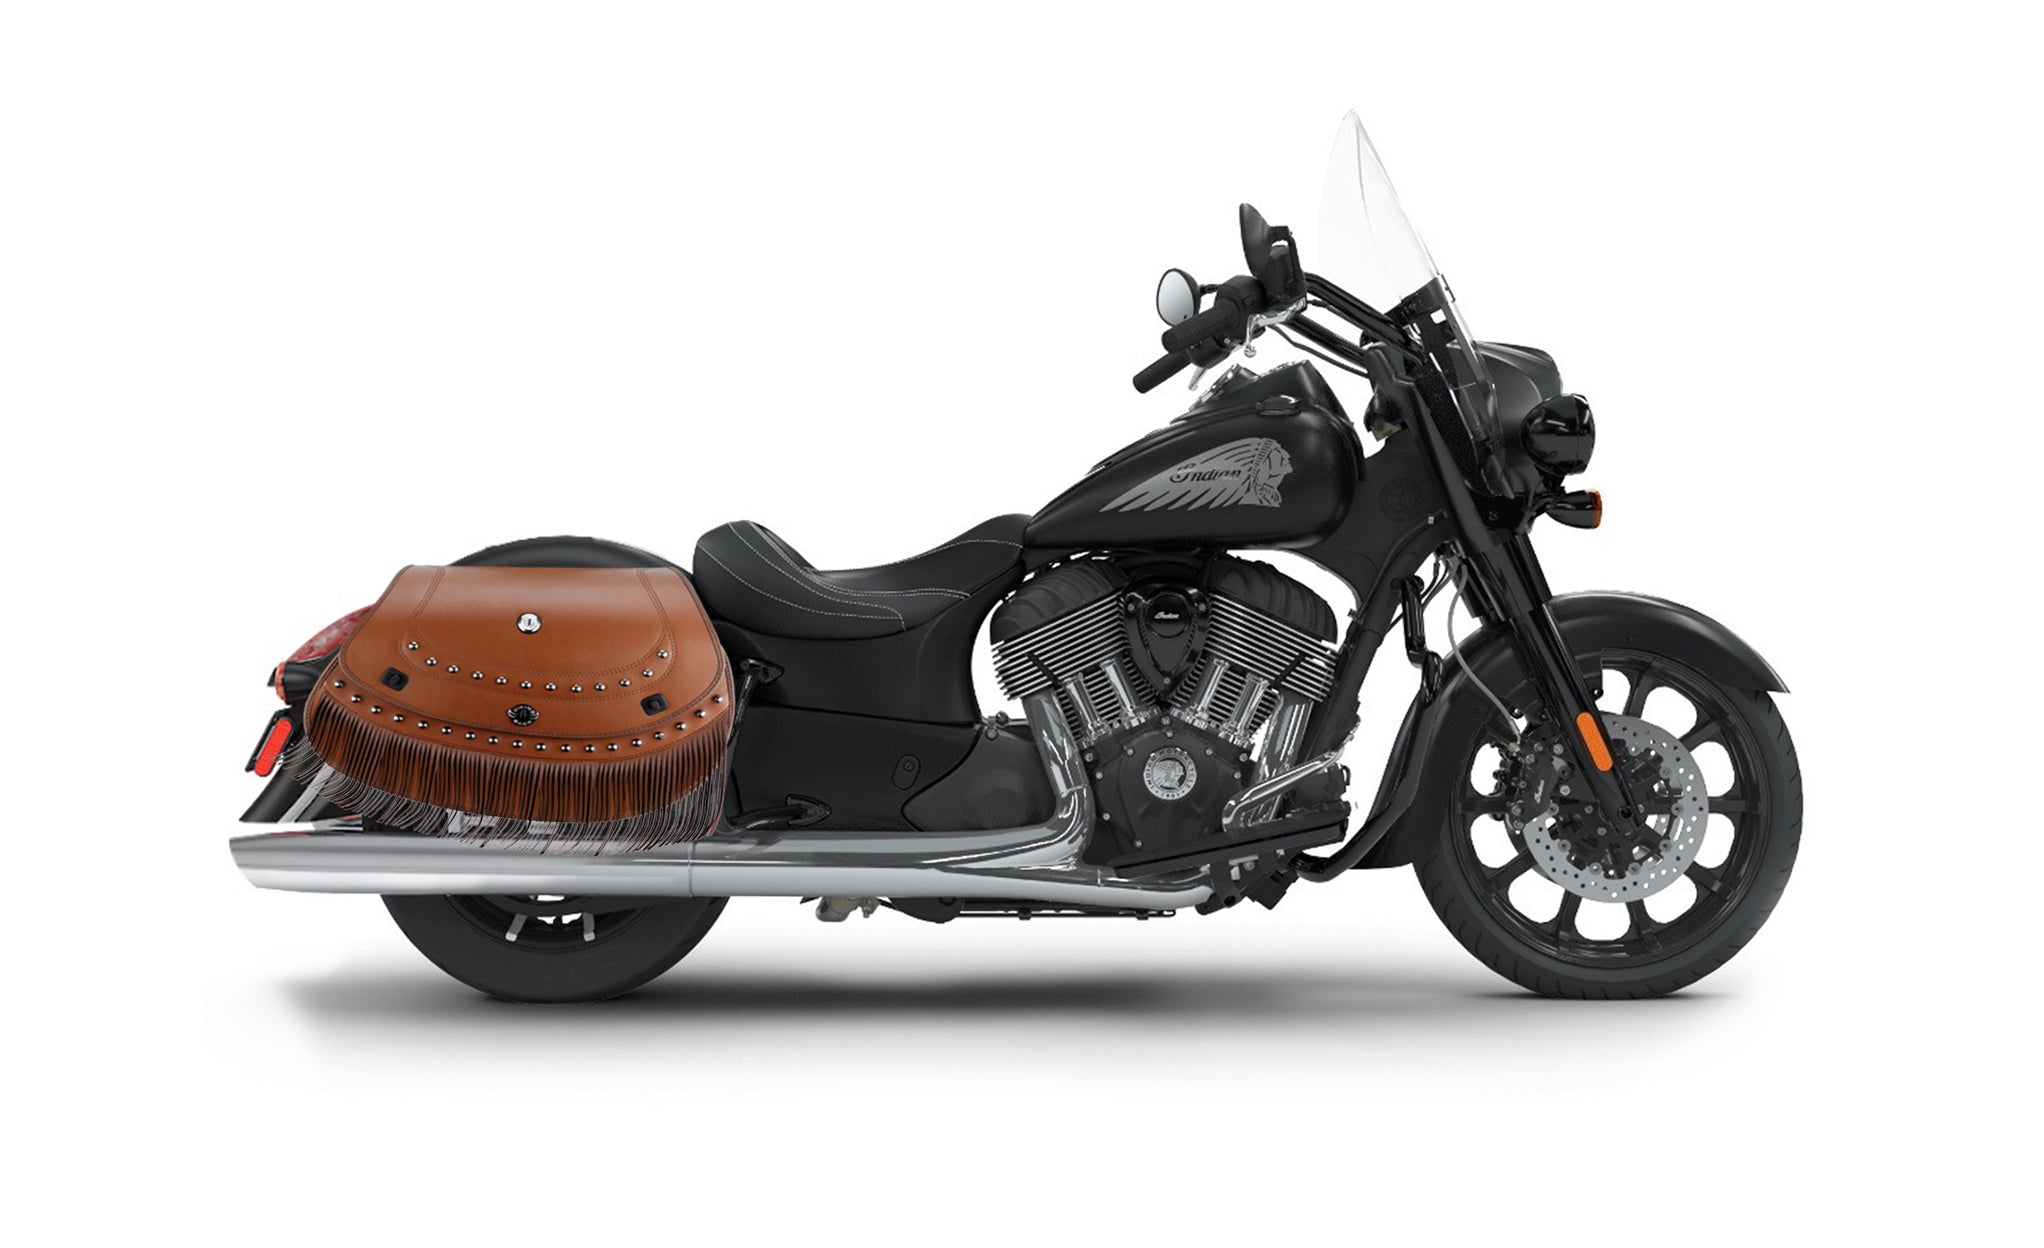 Viking Mohawk Brown Extra Large Indian Springfield Darkhorse Specific Leather Motorcycle Saddlebags on Bike Photo @expand